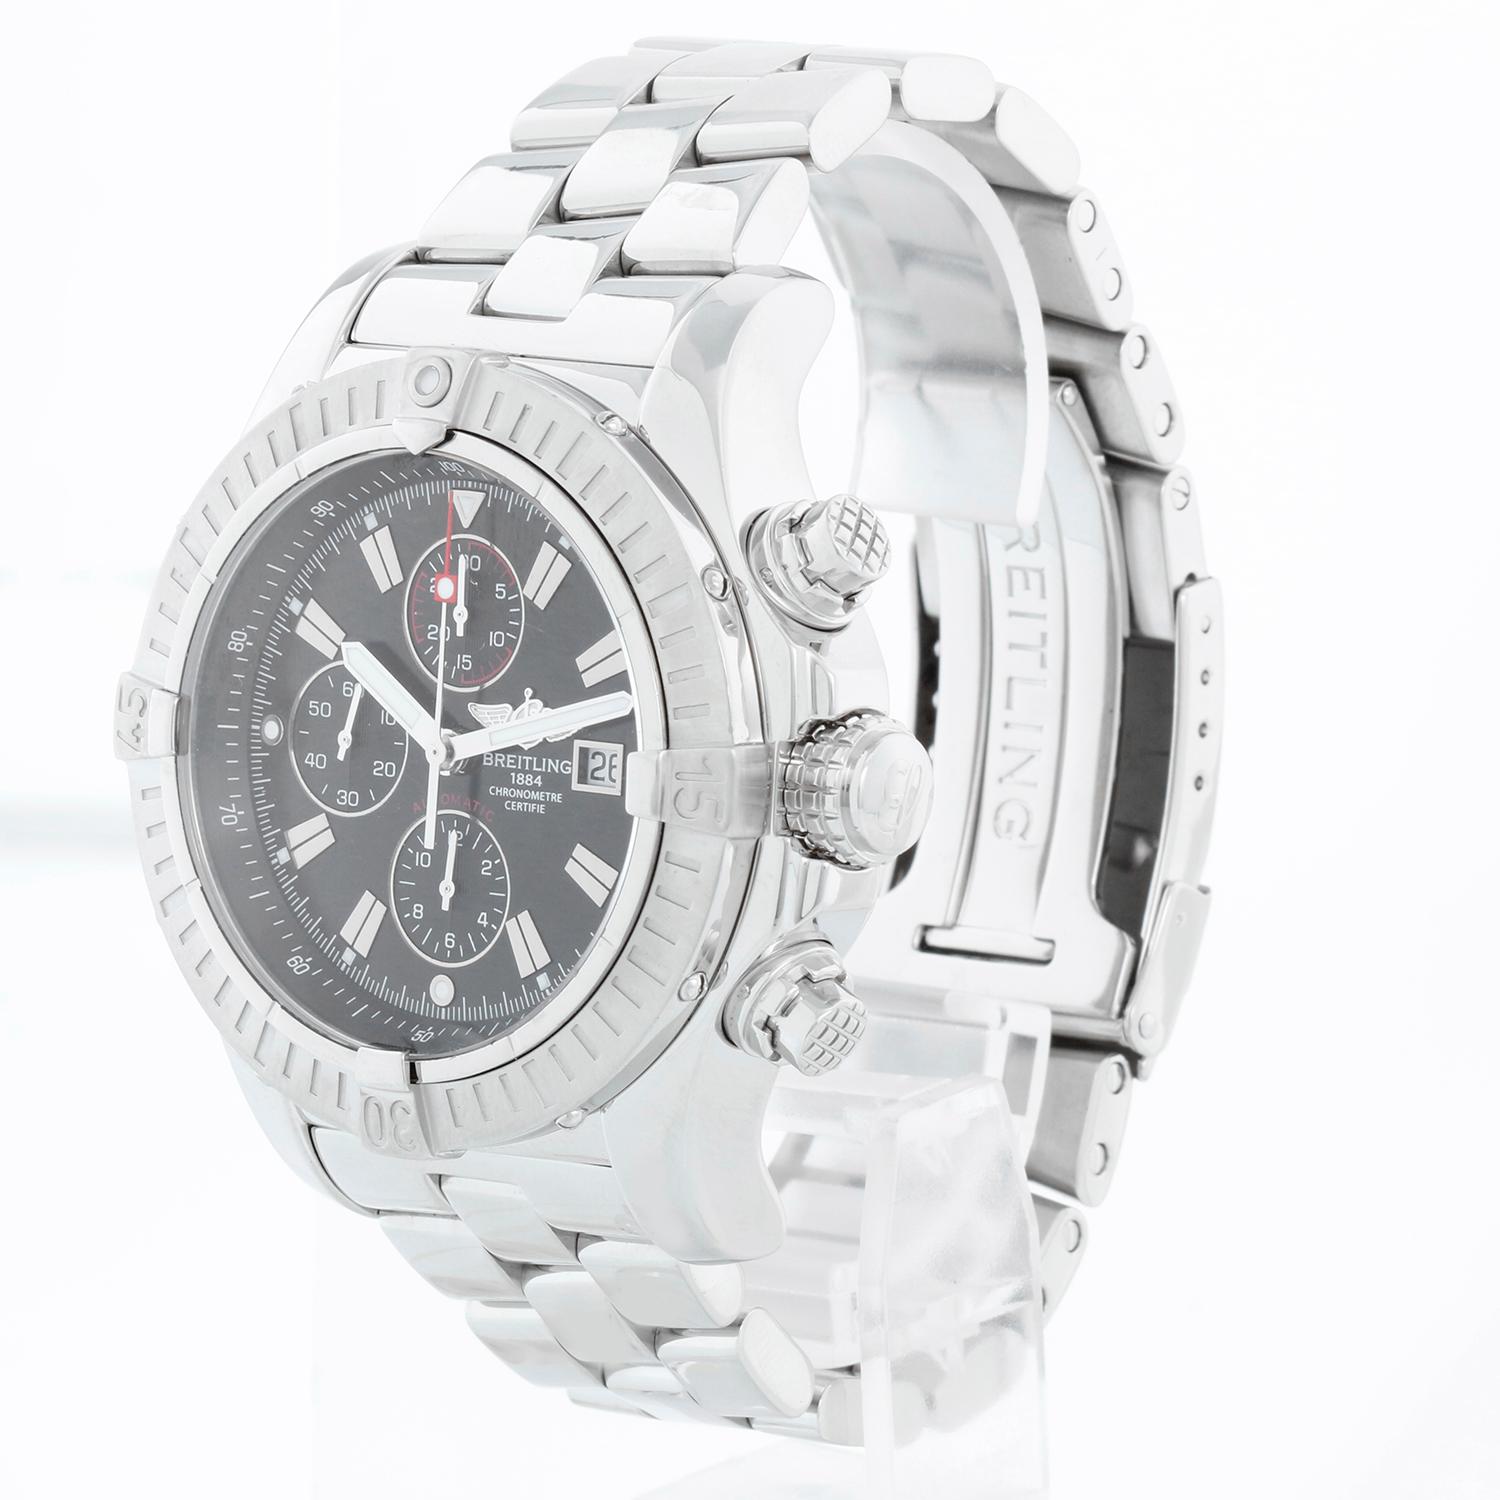 Breitling Avenger Black Dial Men's Chrono Stainless Steel Watch A13370 In Excellent Condition For Sale In Dallas, TX